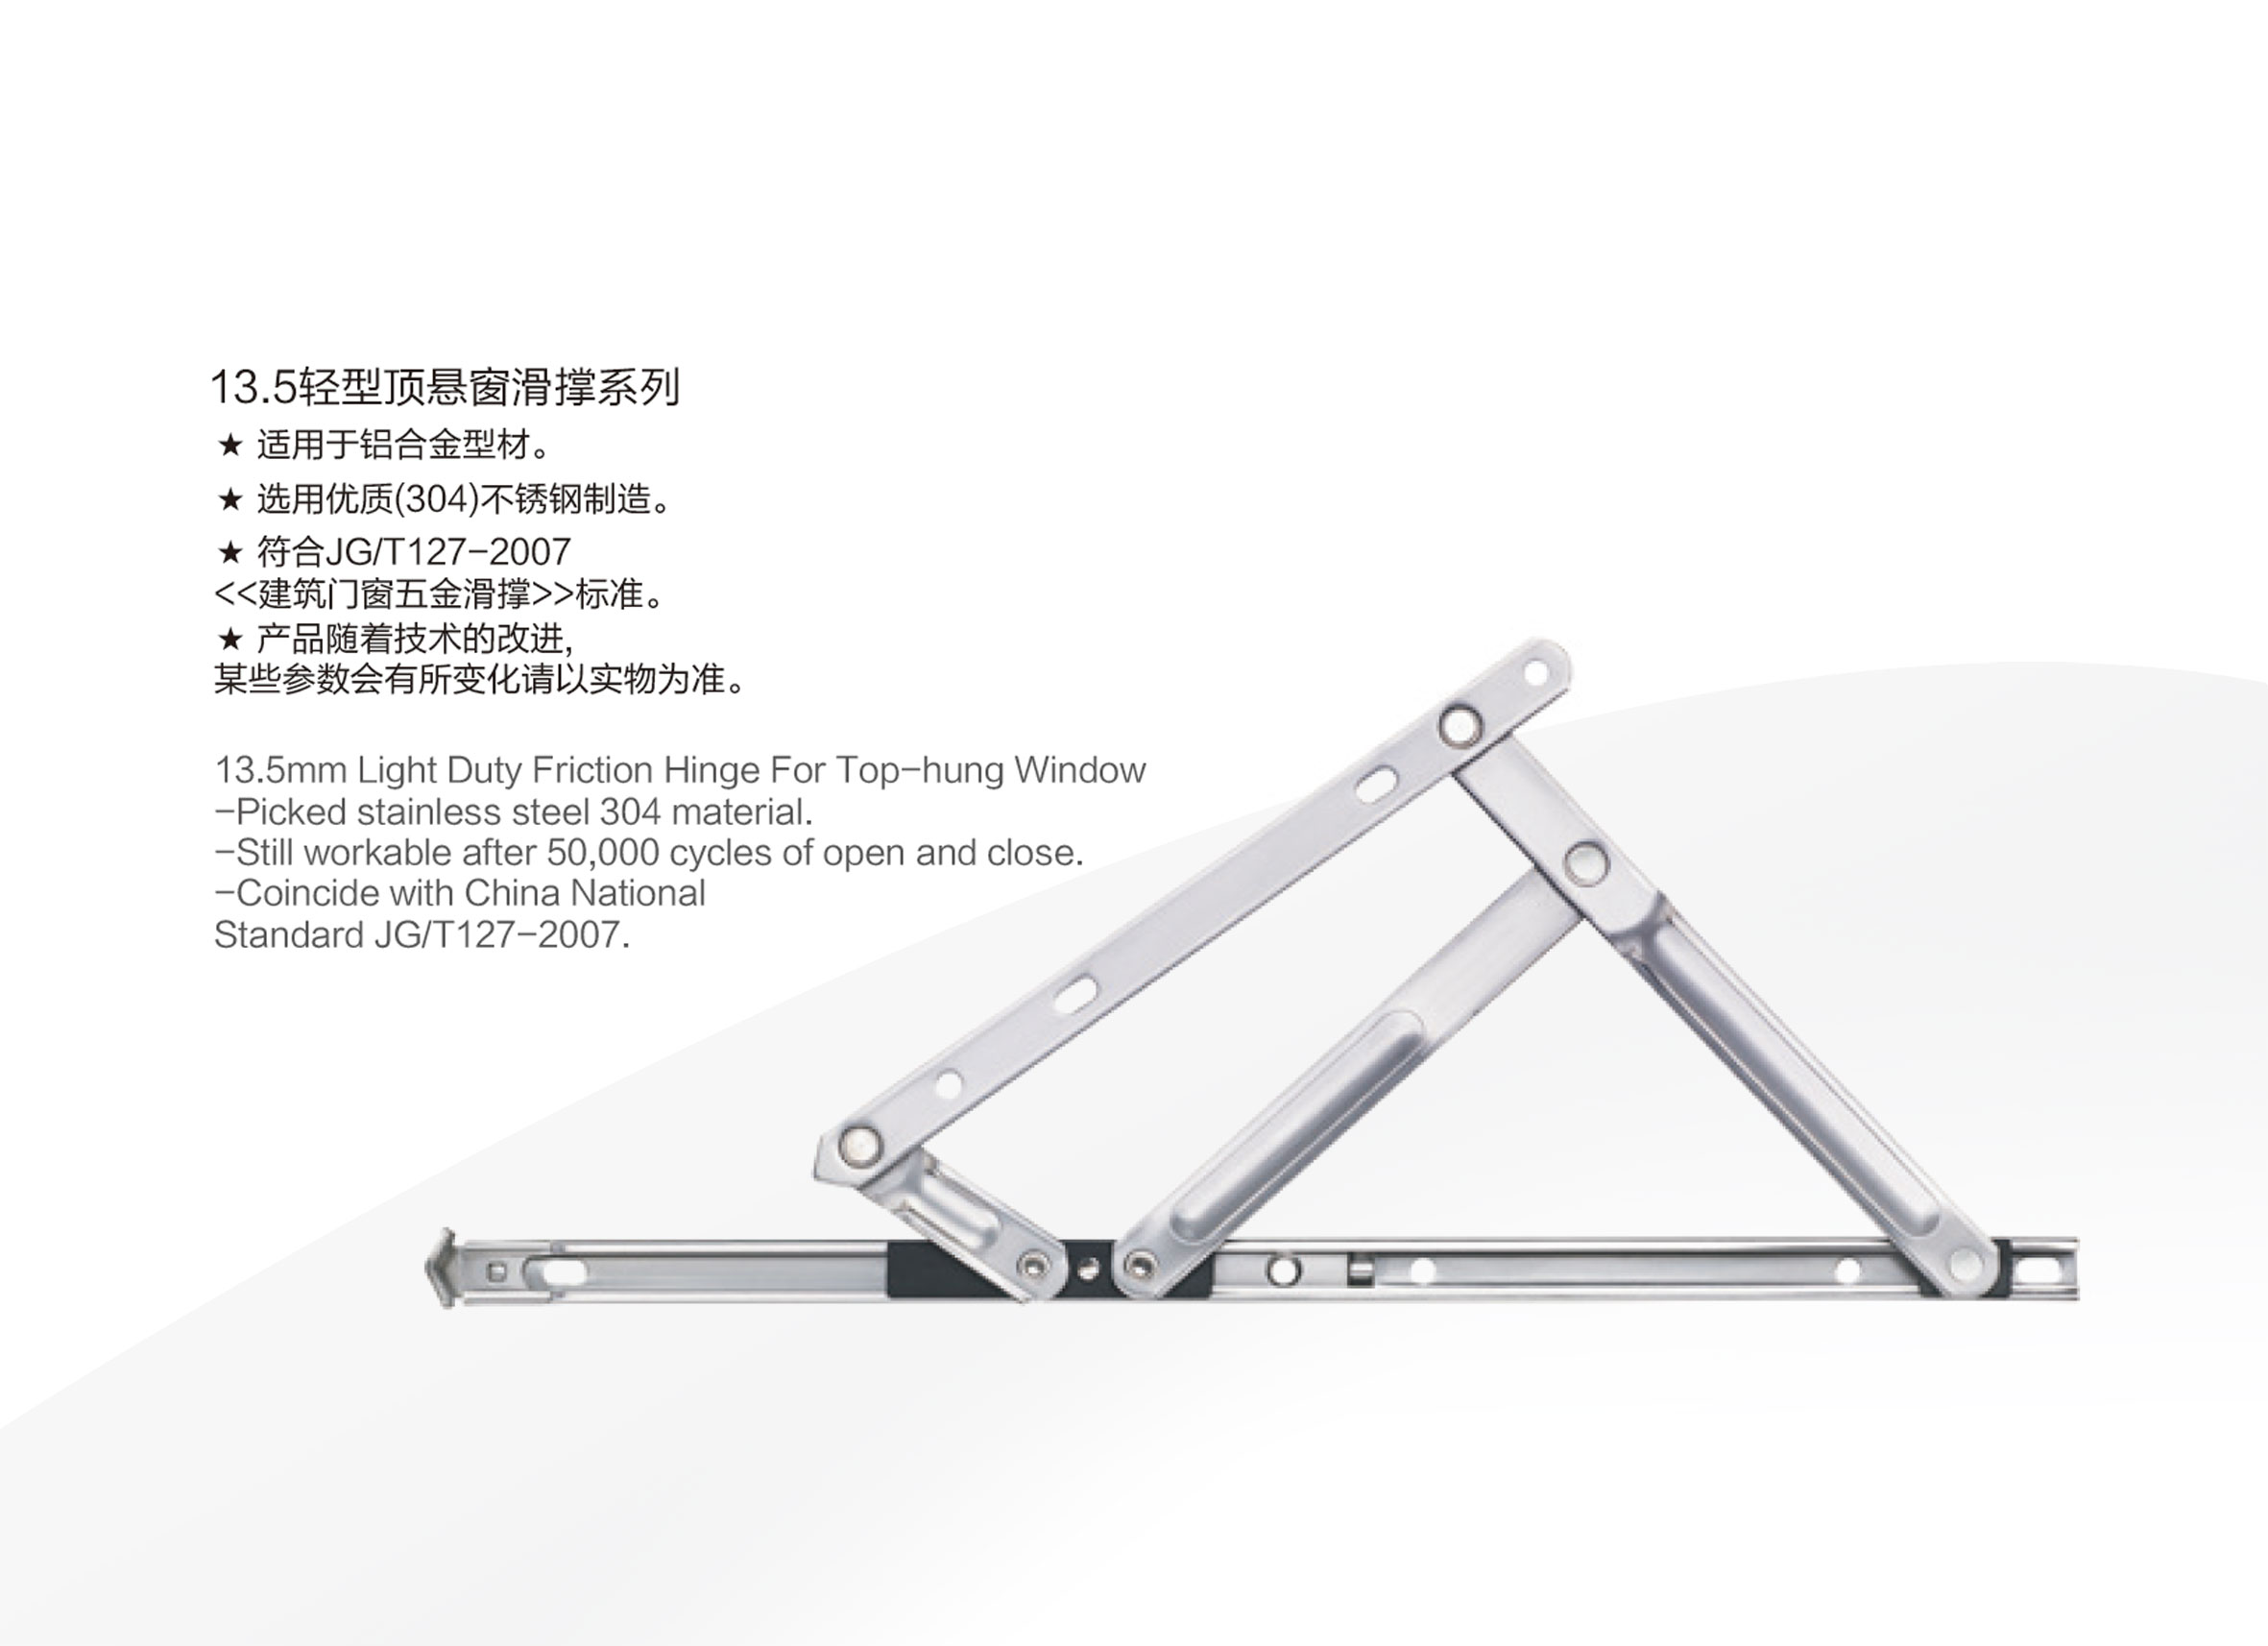 13.5mm Light Duty Friction Hinge For Top-hung Window